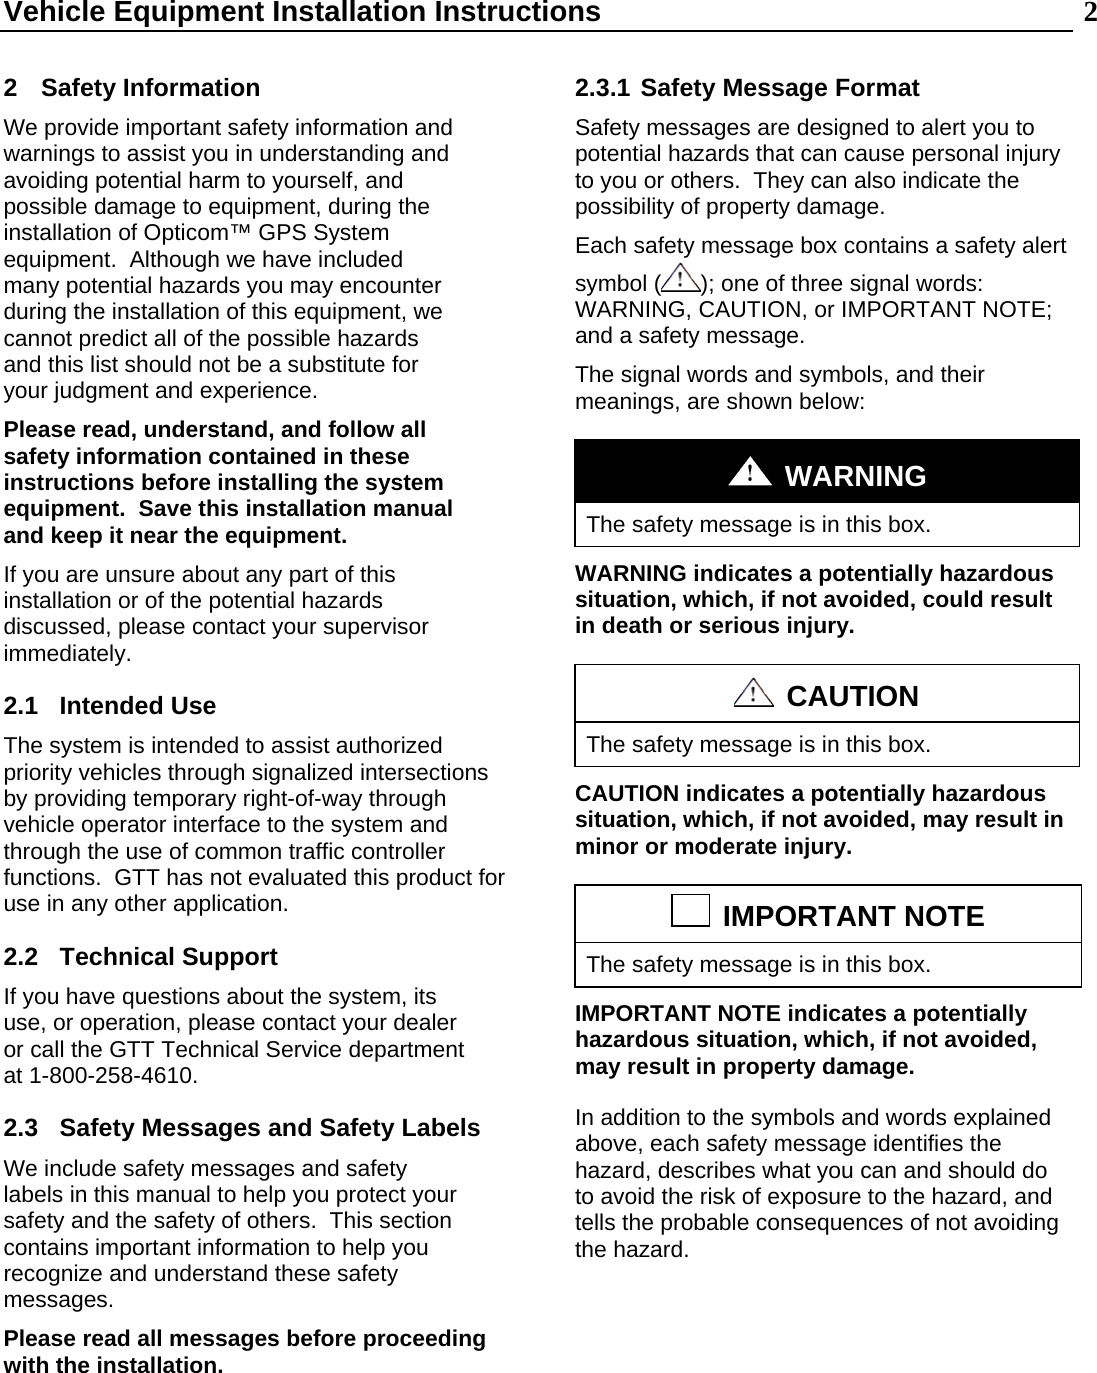 Vehicle Equipment Installation Instructions  2 2 Safety Information We provide important safety information and warnings to assist you in understanding and avoiding potential harm to yourself, and possible damage to equipment, during the installation of Opticom™ GPS System equipment.  Although we have included many potential hazards you may encounter during the installation of this equipment, we cannot predict all of the possible hazards and this list should not be a substitute for your judgment and experience. Please read, understand, and follow all safety information contained in these instructions before installing the system equipment.  Save this installation manual and keep it near the equipment. If you are unsure about any part of this installation or of the potential hazards discussed, please contact your supervisor immediately. 2.1  Intended Use  The system is intended to assist authorized priority vehicles through signalized intersections by providing temporary right-of-way through vehicle operator interface to the system and through the use of common traffic controller functions.  GTT has not evaluated this product for use in any other application. 2.2 Technical Support If you have questions about the system, its use, or operation, please contact your dealer or call the GTT Technical Service department at 1-800-258-4610. 2.3  Safety Messages and Safety Labels We include safety messages and safety labels in this manual to help you protect your safety and the safety of others.  This section contains important information to help you recognize and understand these safety messages. Please read all messages before proceeding with the installation.    2.3.1 Safety Message Format Safety messages are designed to alert you to potential hazards that can cause personal injury to you or others.  They can also indicate the possibility of property damage. Each safety message box contains a safety alert symbol ( ); one of three signal words: WARNING, CAUTION, or IMPORTANT NOTE; and a safety message. The signal words and symbols, and their meanings, are shown below:   WARNING The safety message is in this box. WARNING indicates a potentially hazardous situation, which, if not avoided, could result in death or serious injury.   CAUTION The safety message is in this box. CAUTION indicates a potentially hazardous situation, which, if not avoided, may result in minor or moderate injury.   IMPORTANT NOTE The safety message is in this box. IMPORTANT NOTE indicates a potentially hazardous situation, which, if not avoided, may result in property damage. In addition to the symbols and words explained above, each safety message identifies the hazard, describes what you can and should do to avoid the risk of exposure to the hazard, and tells the probable consequences of not avoiding the hazard. 